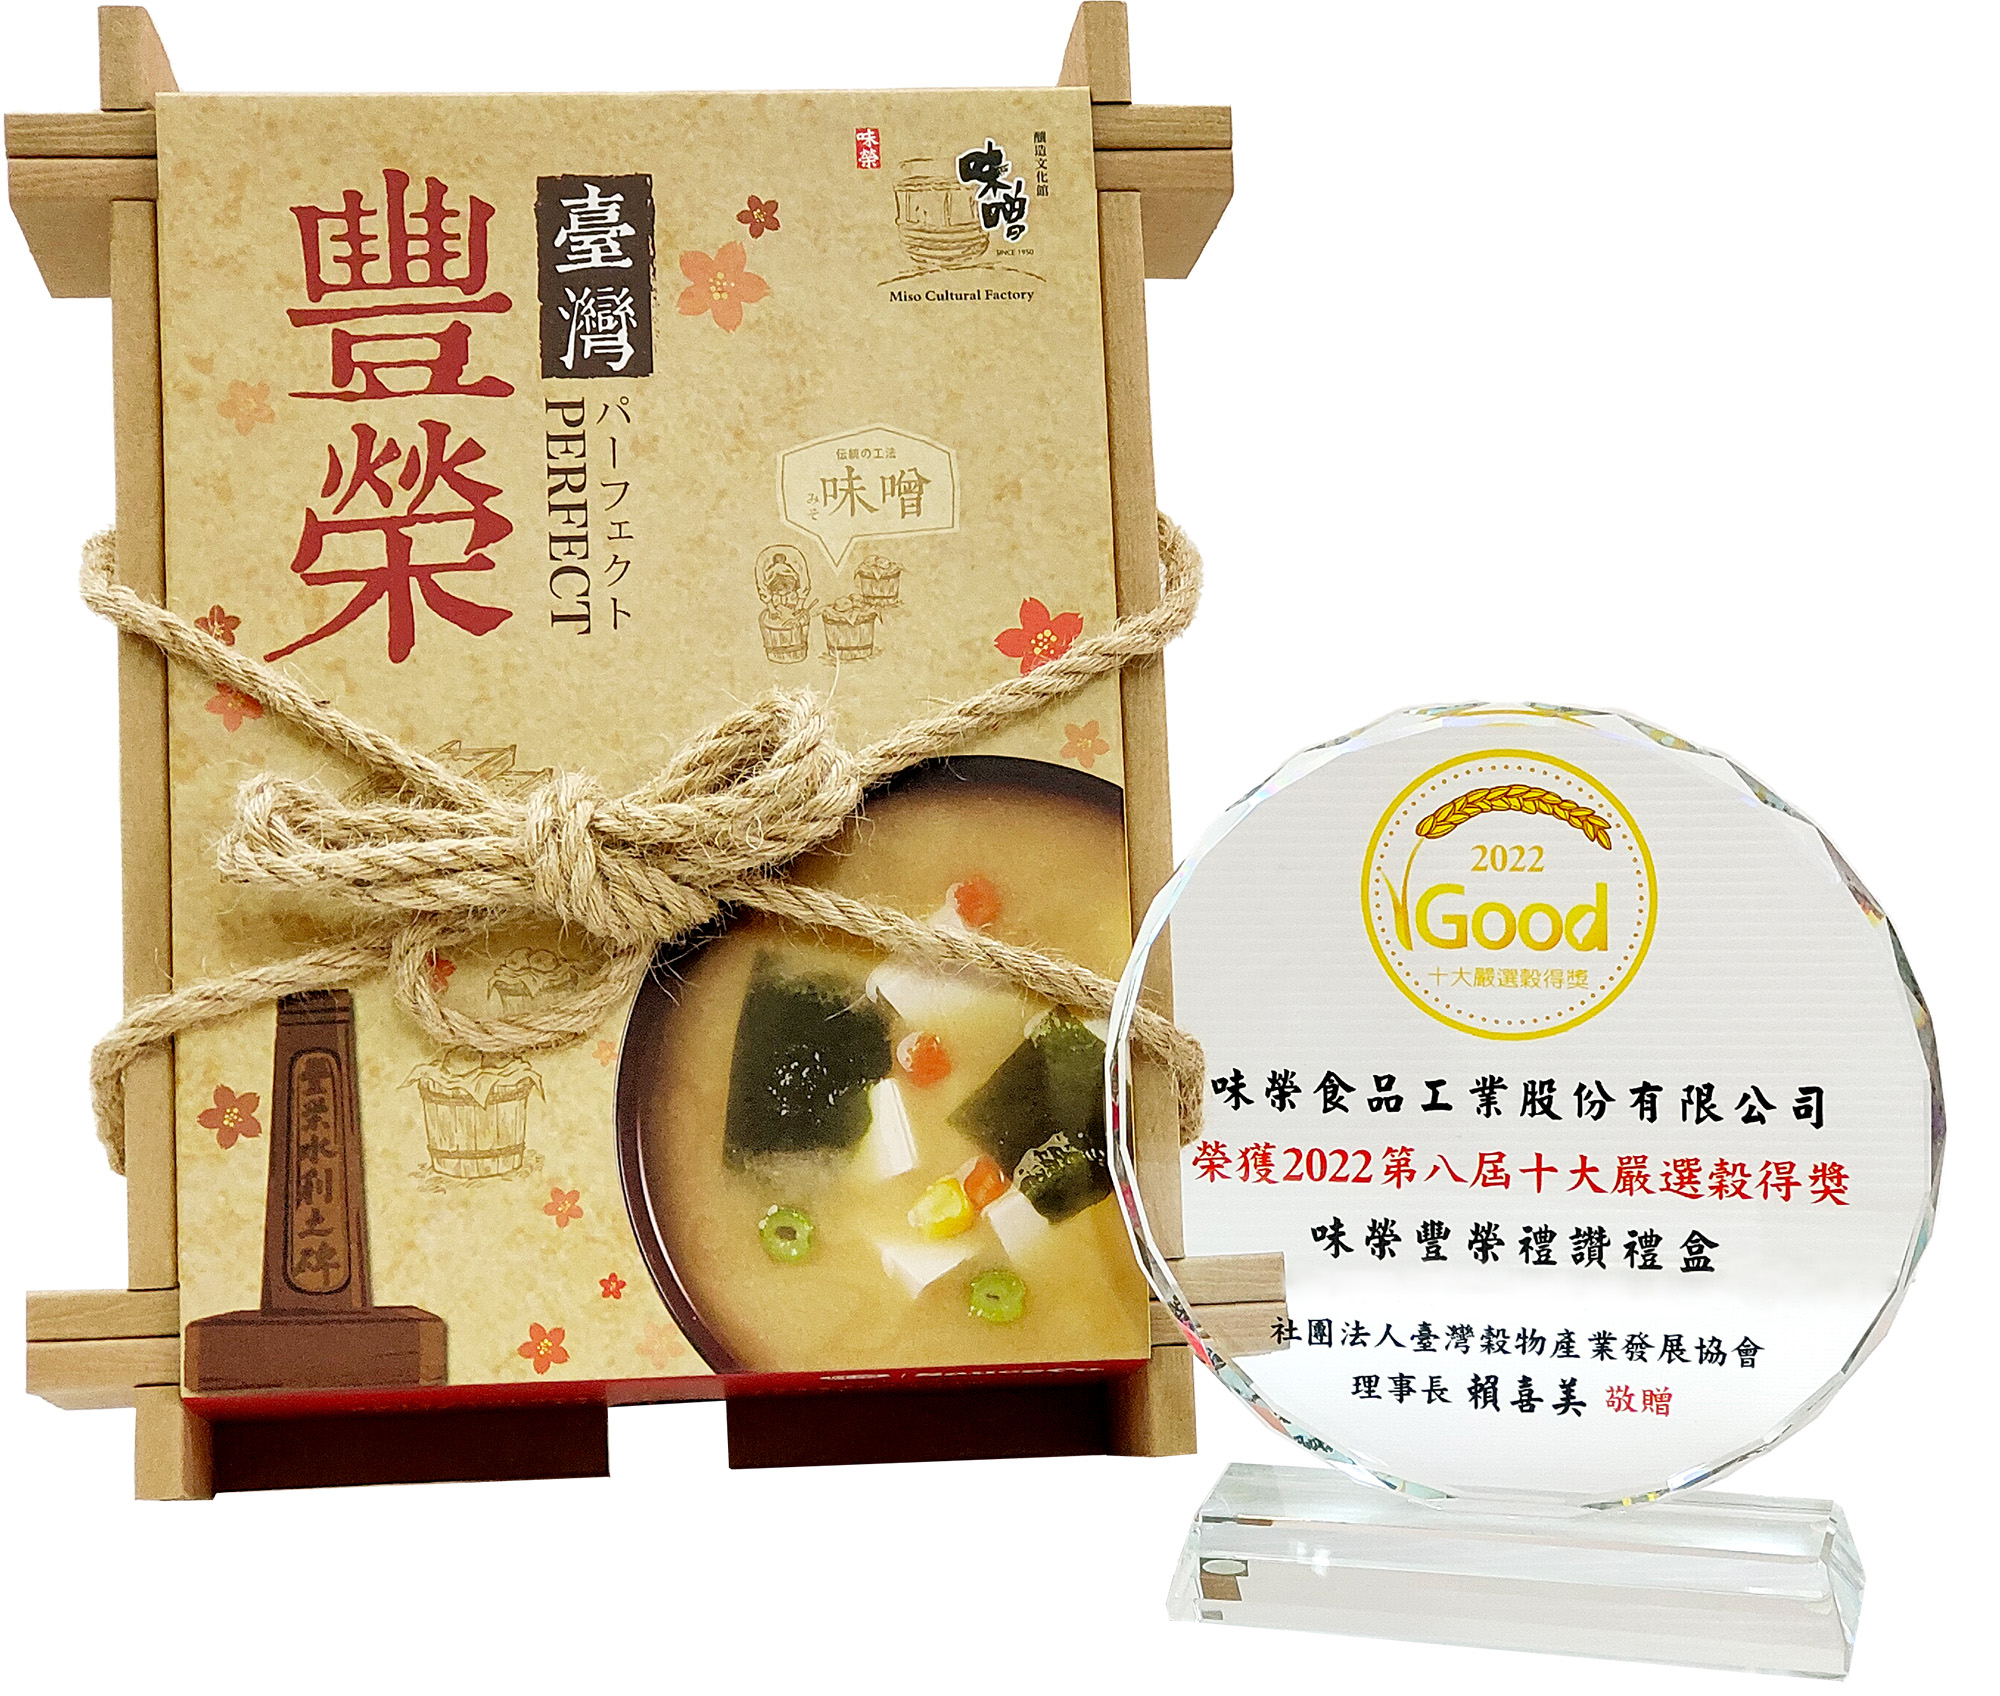 [Fengrong Praise Gift Box] passed the evaluation of the Agricultural and Food Administration of the Executive Yuan Committee of Agriculture and was selected as the eighth "Top Ten Carefully Selected Grain Award Winners"